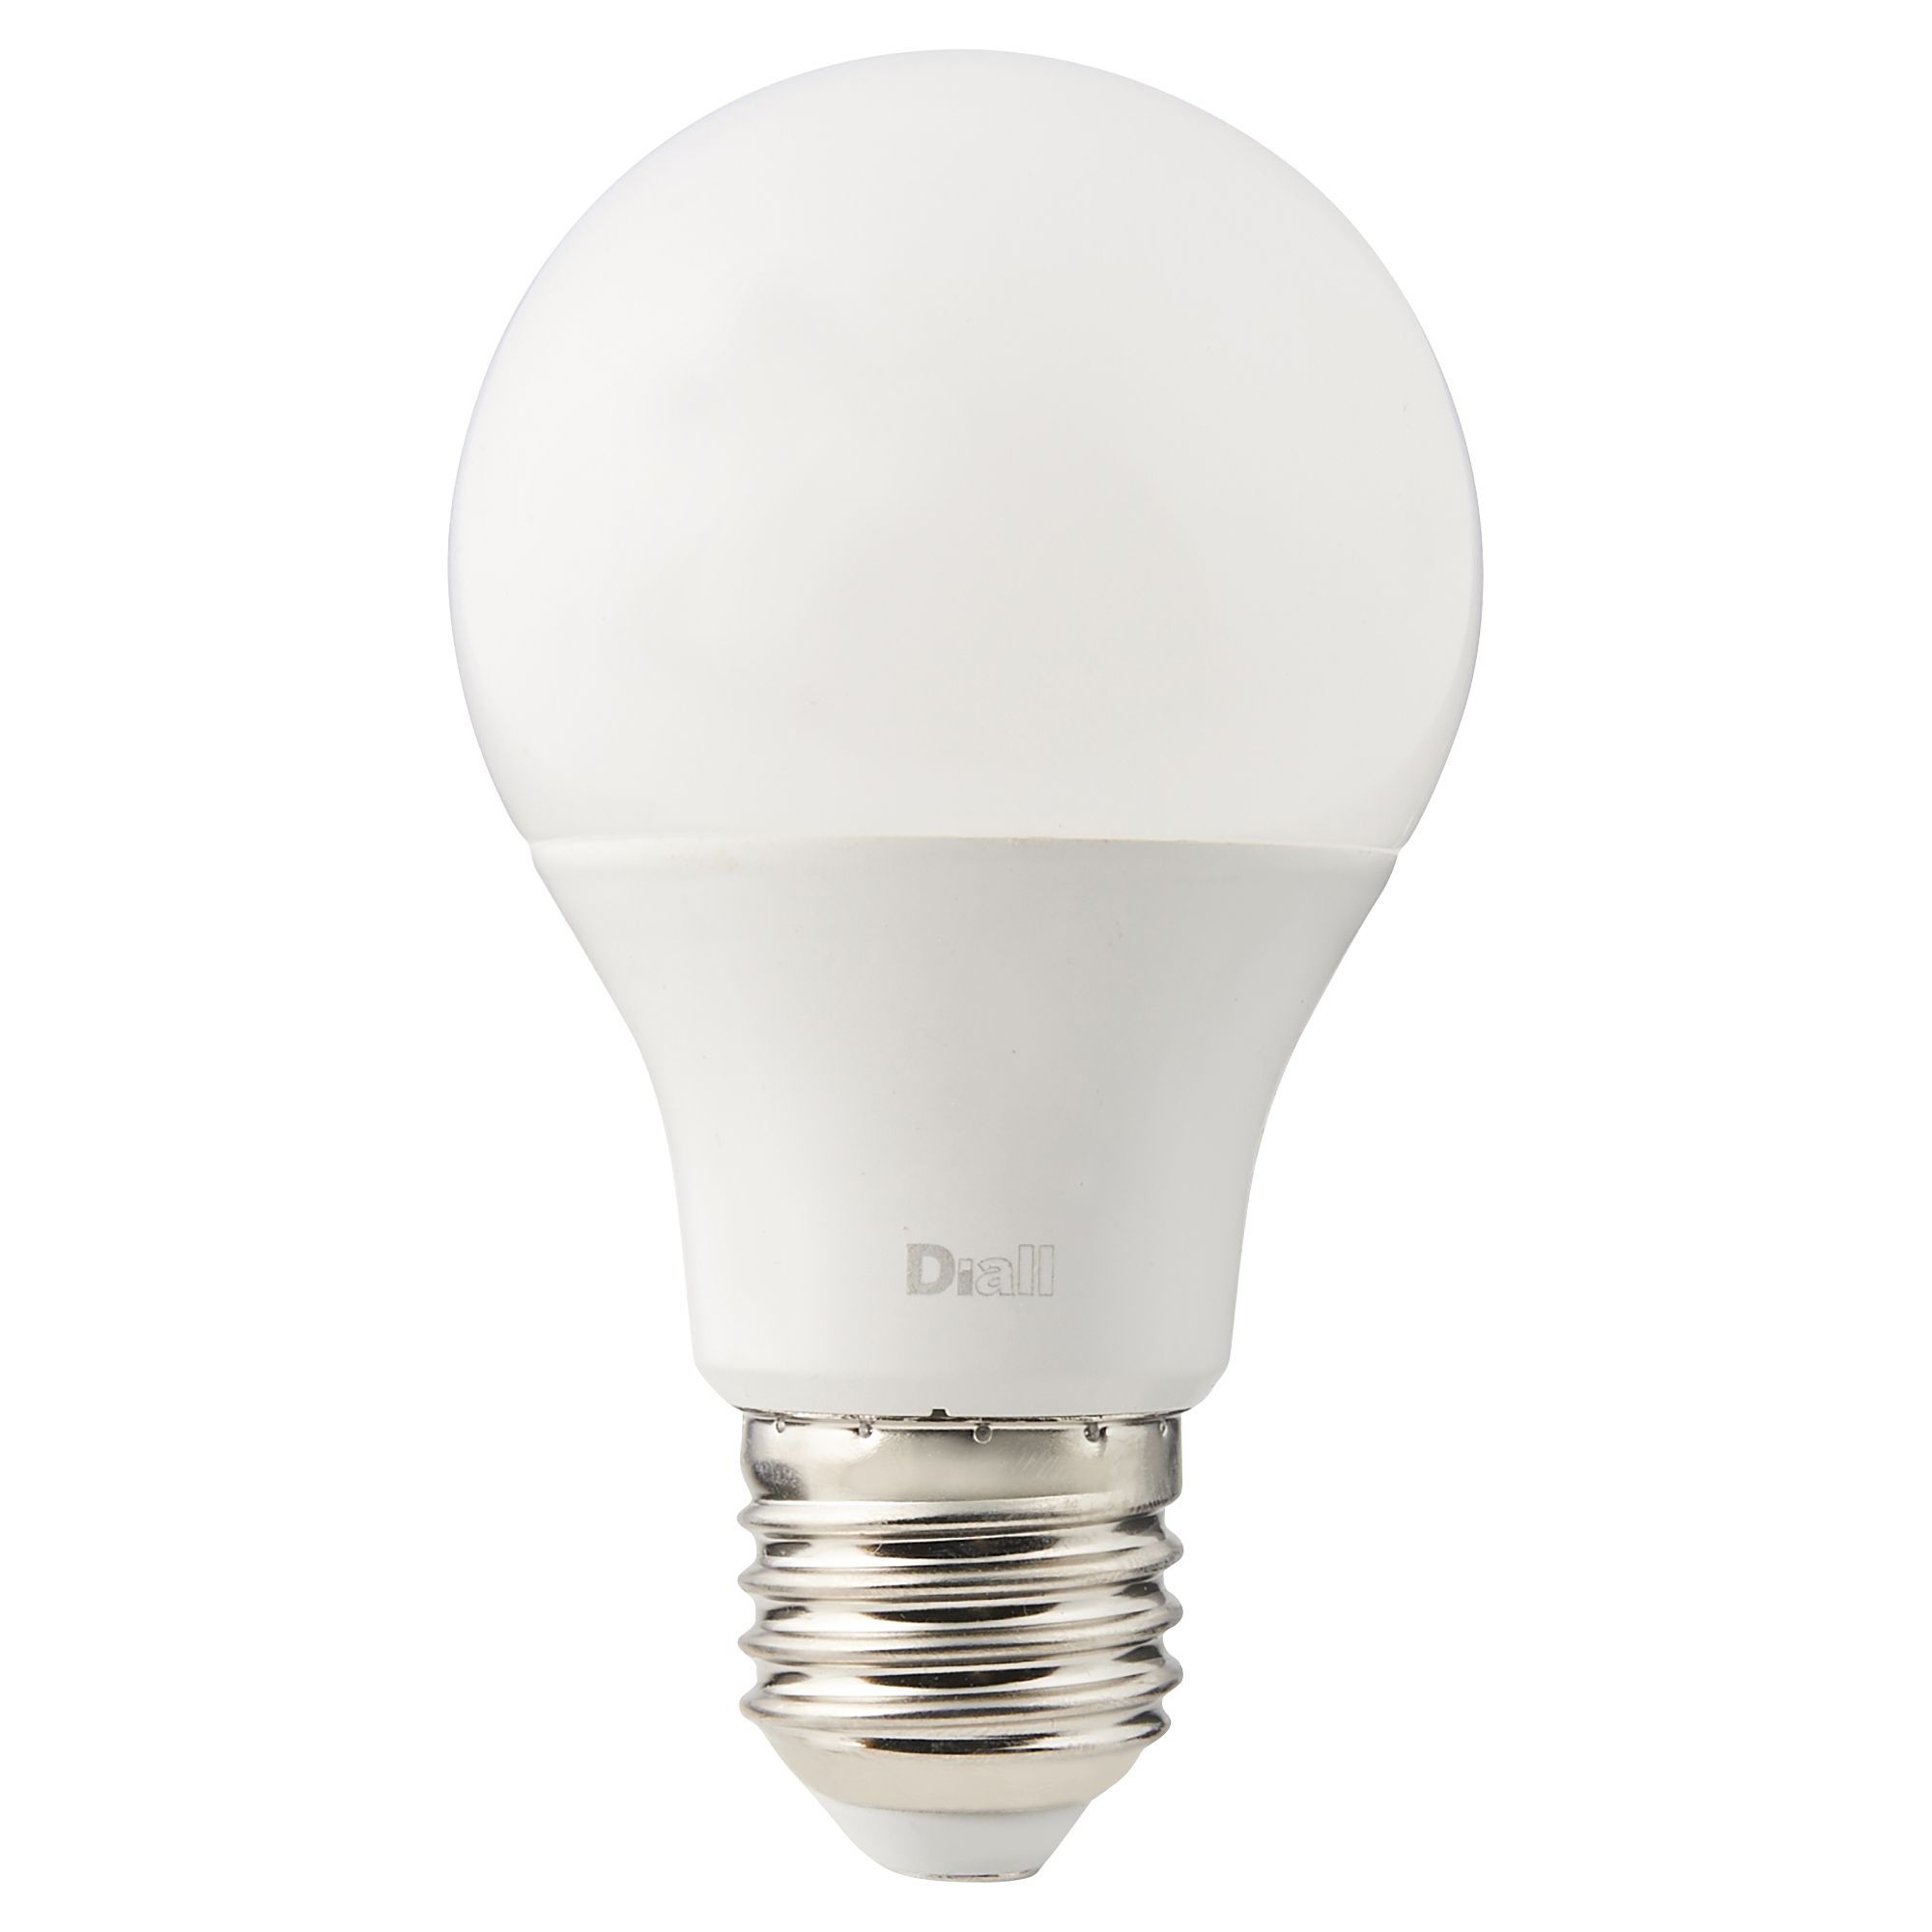 Diall E27 11W 1055lm GLS Warm white LED Light bulb | Departments | DIY ...